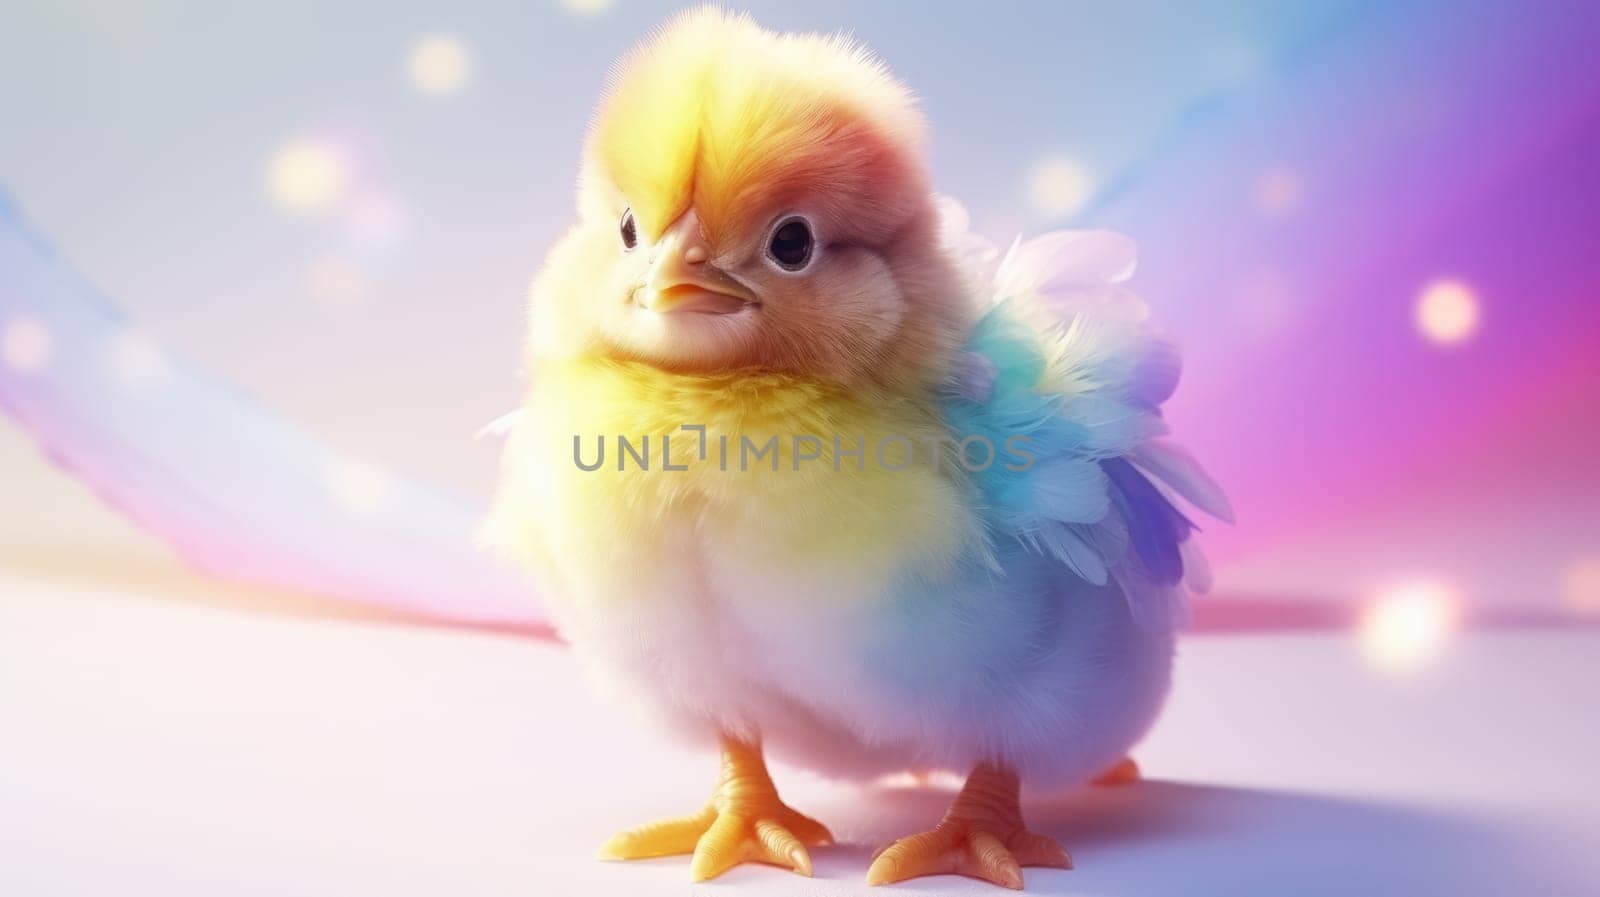 A vibrant chicken with rainbow feathers stands on a pastel rainbow backdrop. Its multicolored feathers contrast beautifully with the soft gradient background, creating a whimsical and cheerful scene.